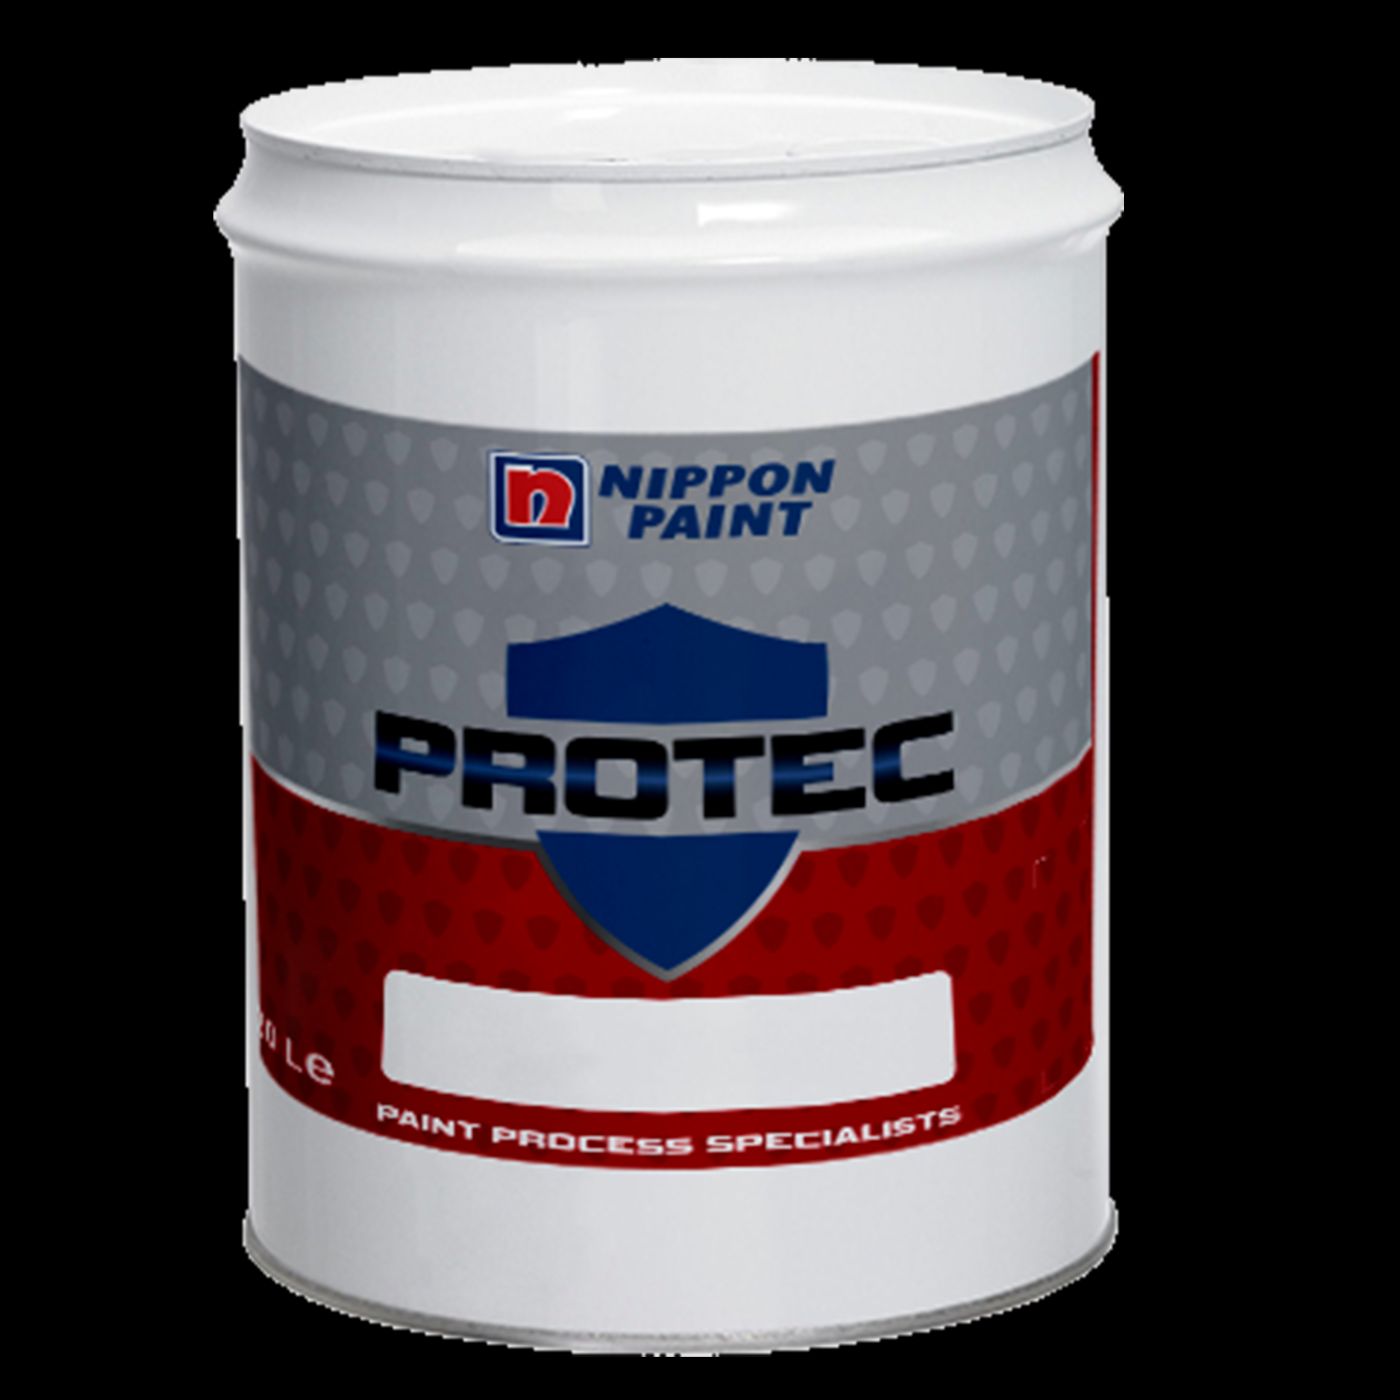 Nippon Paint Launches Protec Range of Industrial Paints.